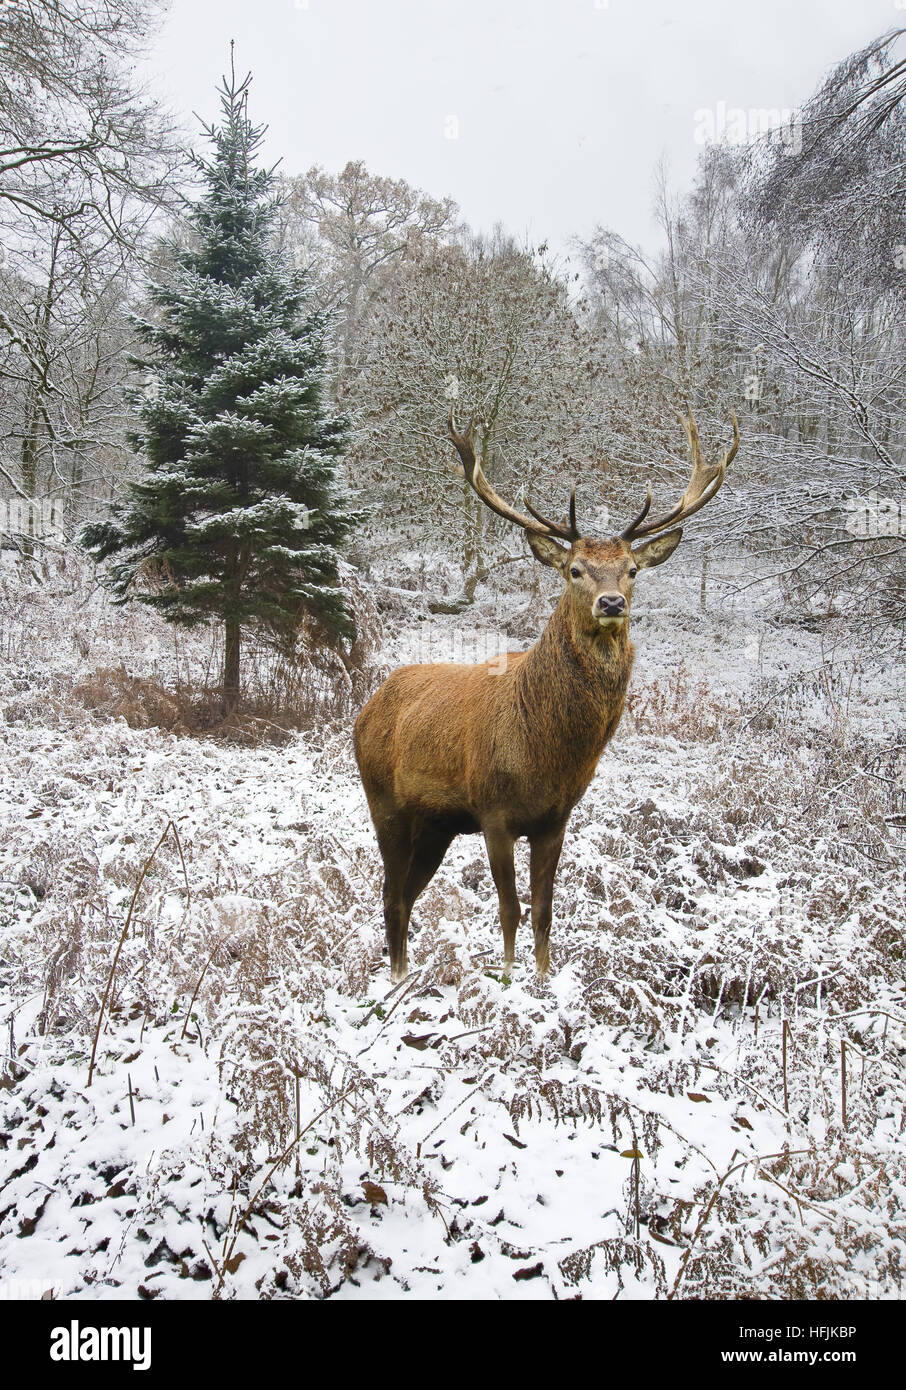 Red Deer stag in snow-covered pine forest - Stock Image - C042/9257 -  Science Photo Library